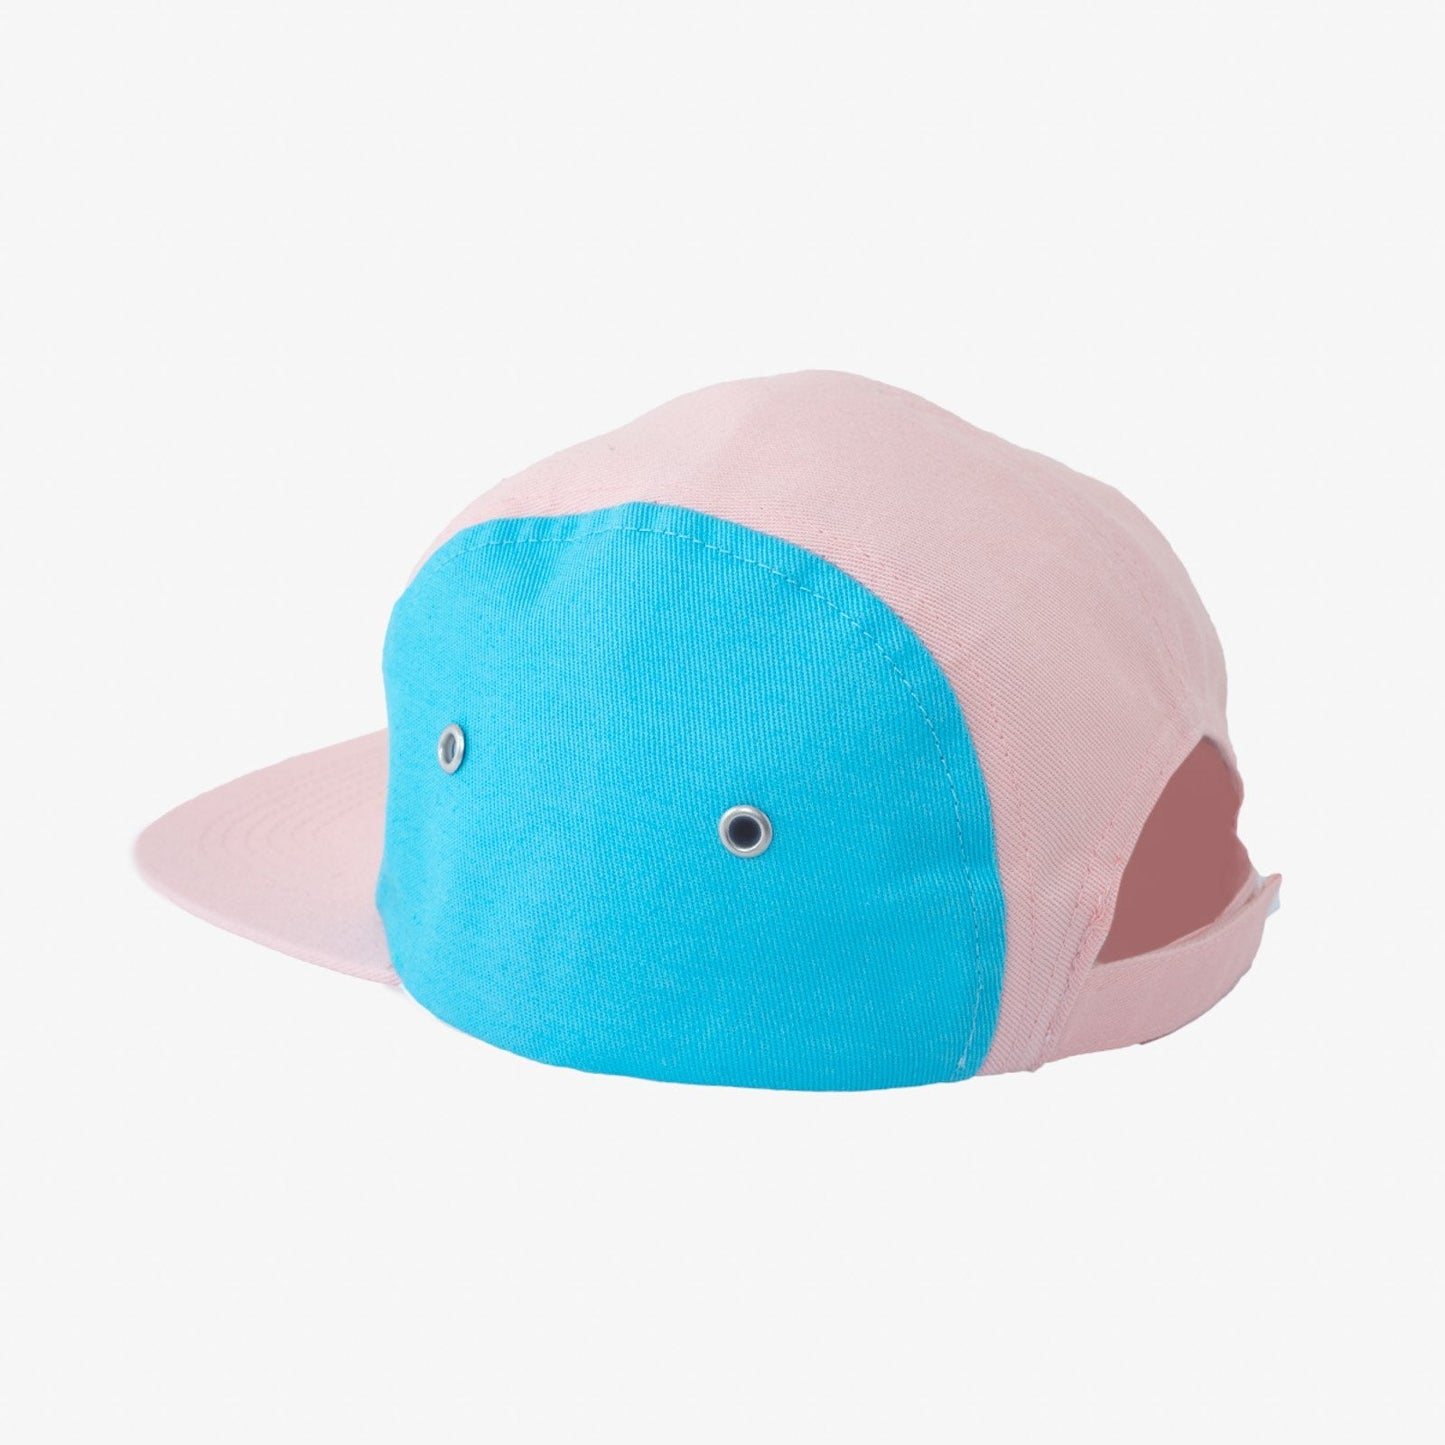 Block Pink 5 Panel Accessories Lil' Boo 